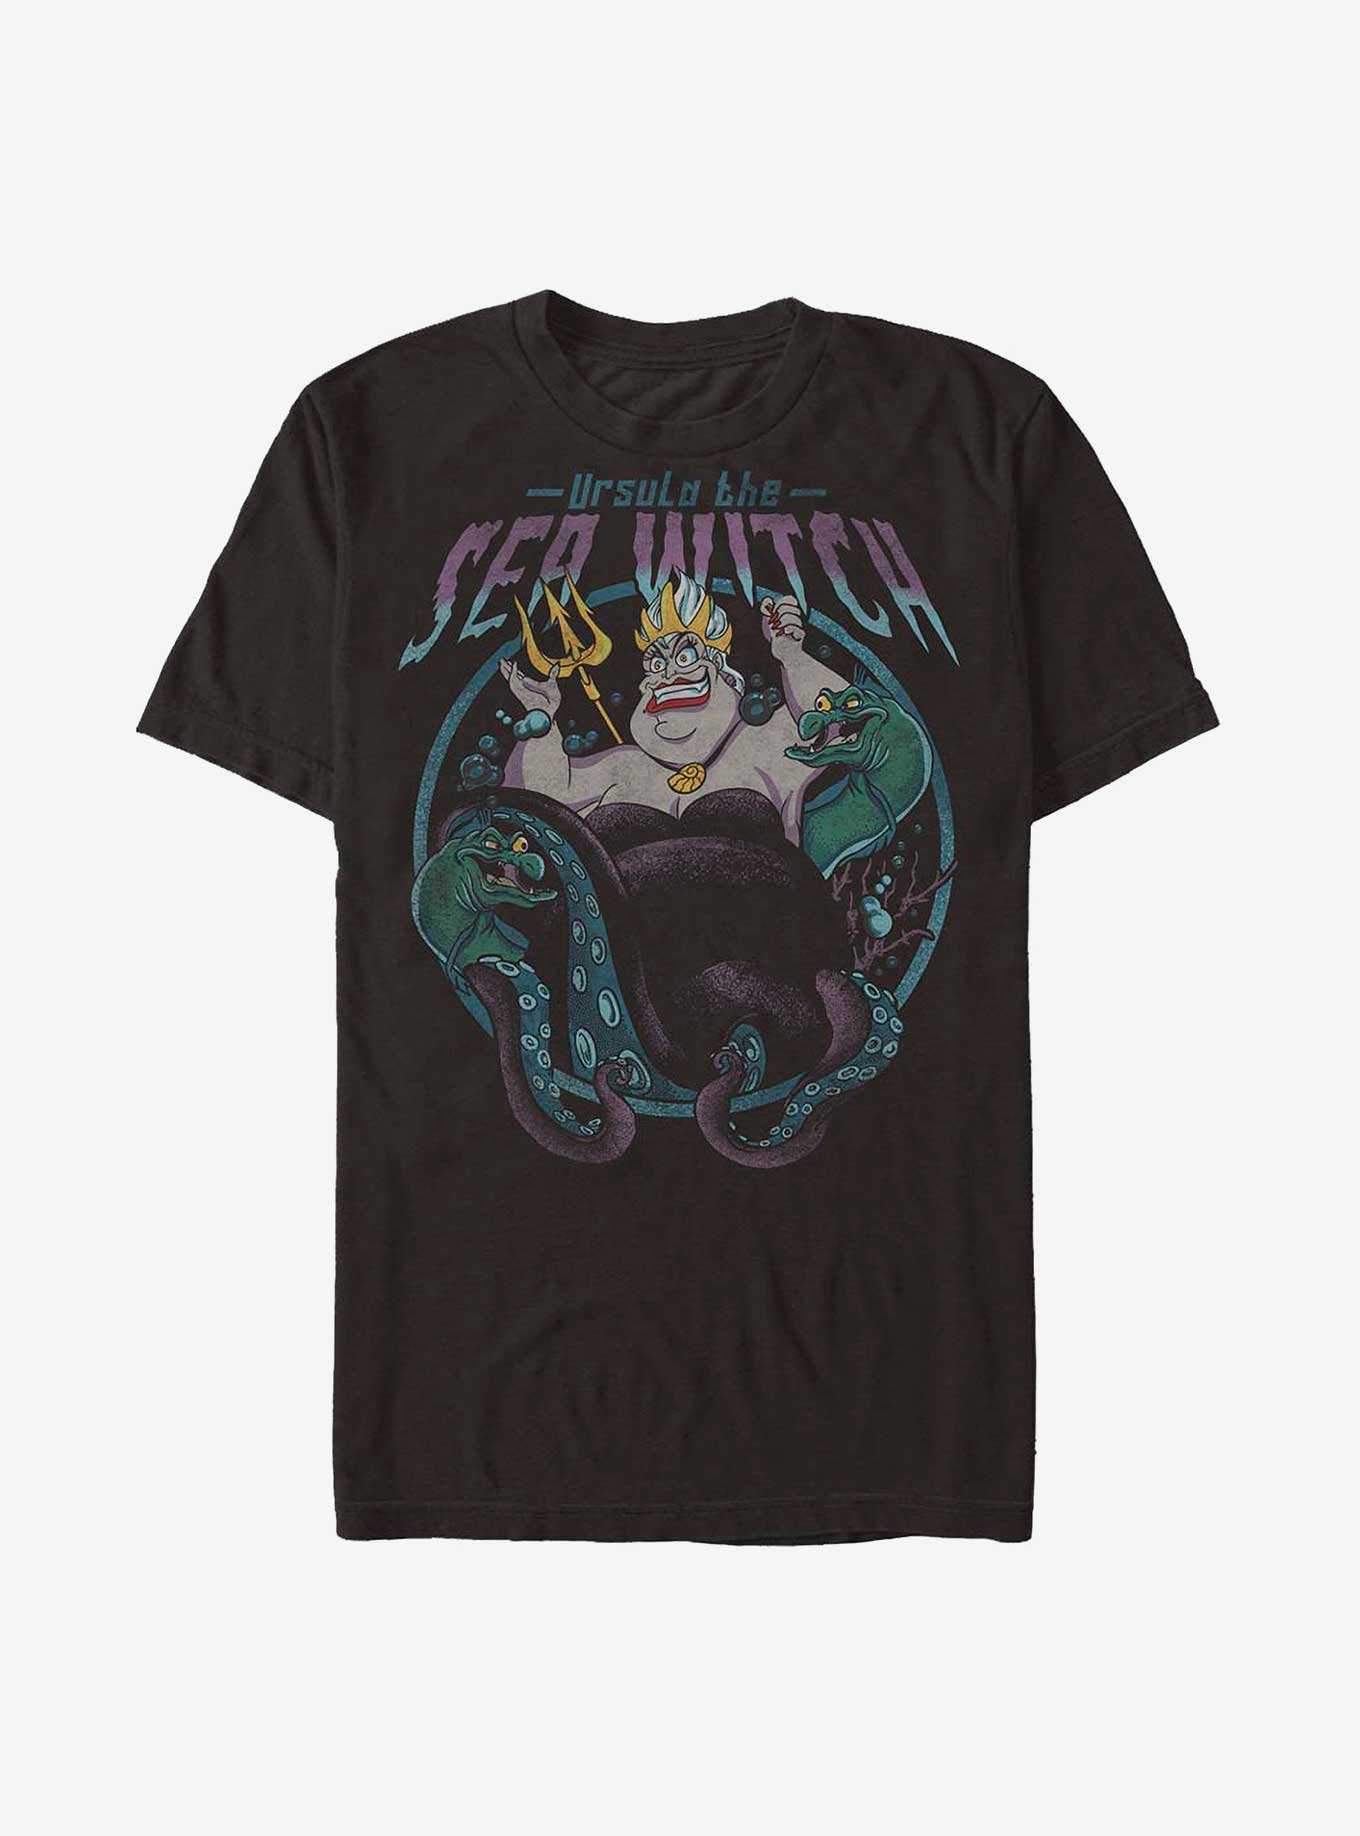 Disney The Little Mermaid Ursula The Sea Witch T-Shirt, , hi-res